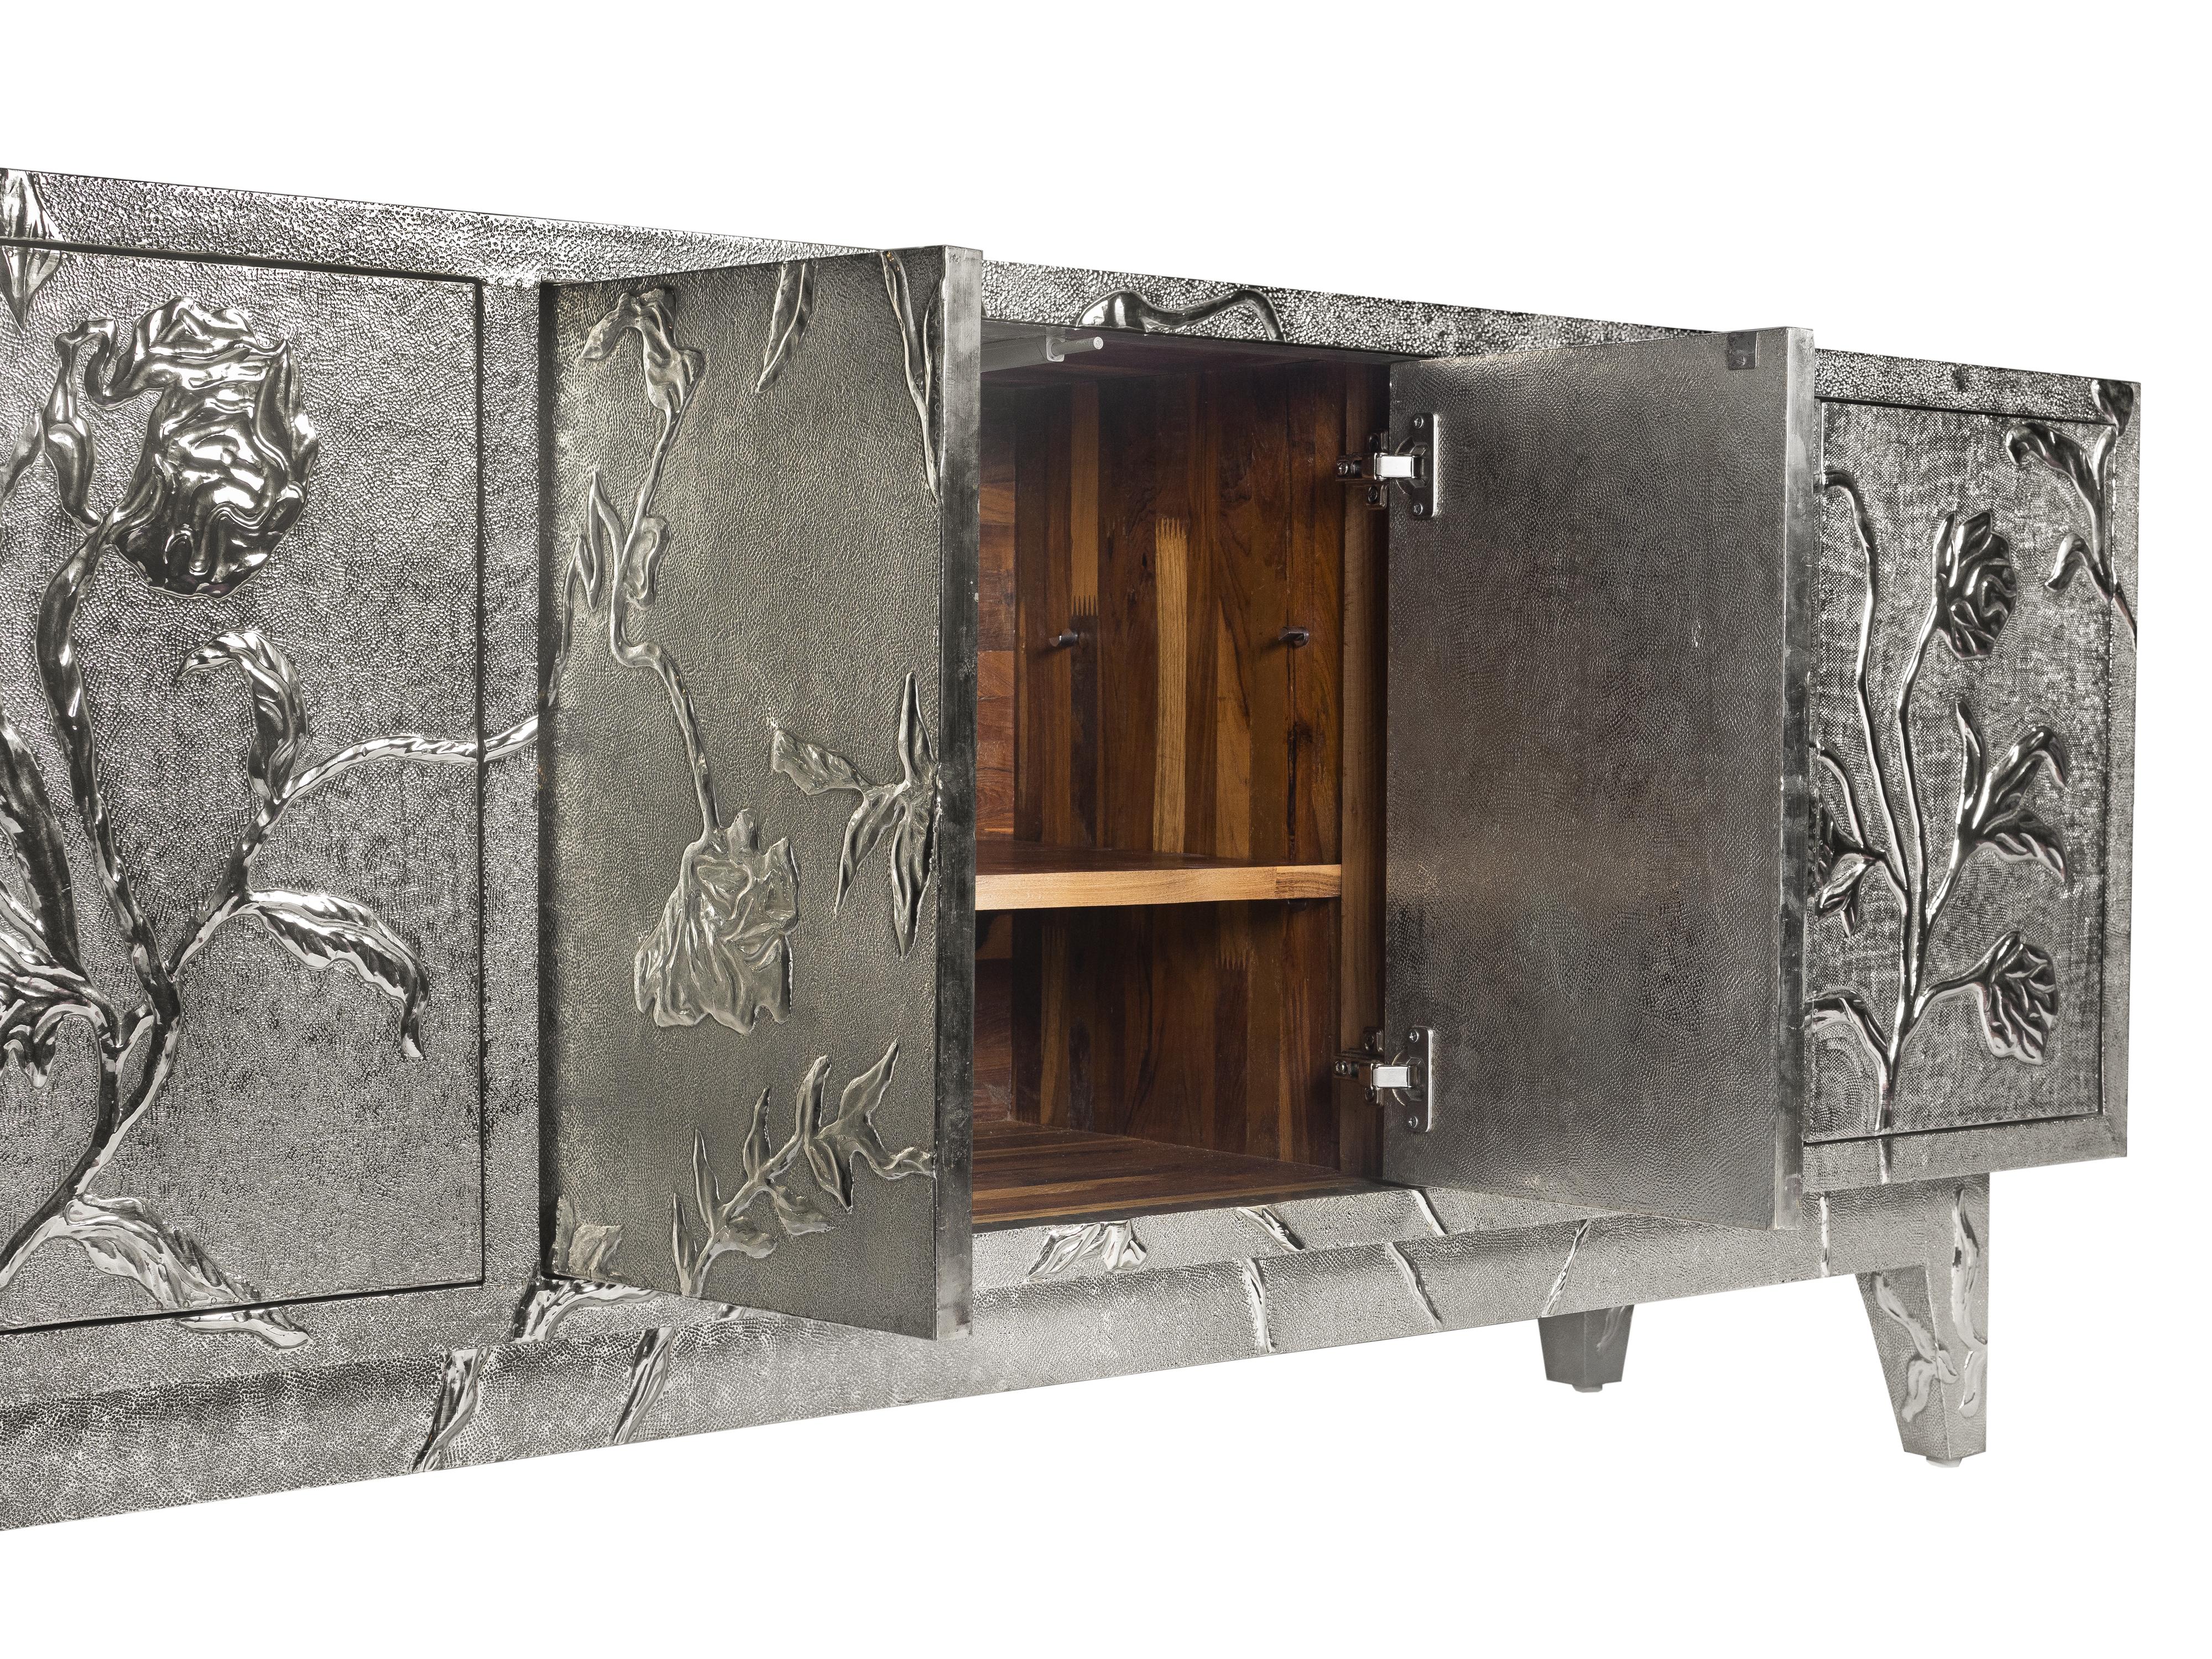 Contemporary Art Deco Sideboard in Floral Design by Stephanie Odegard For Sale